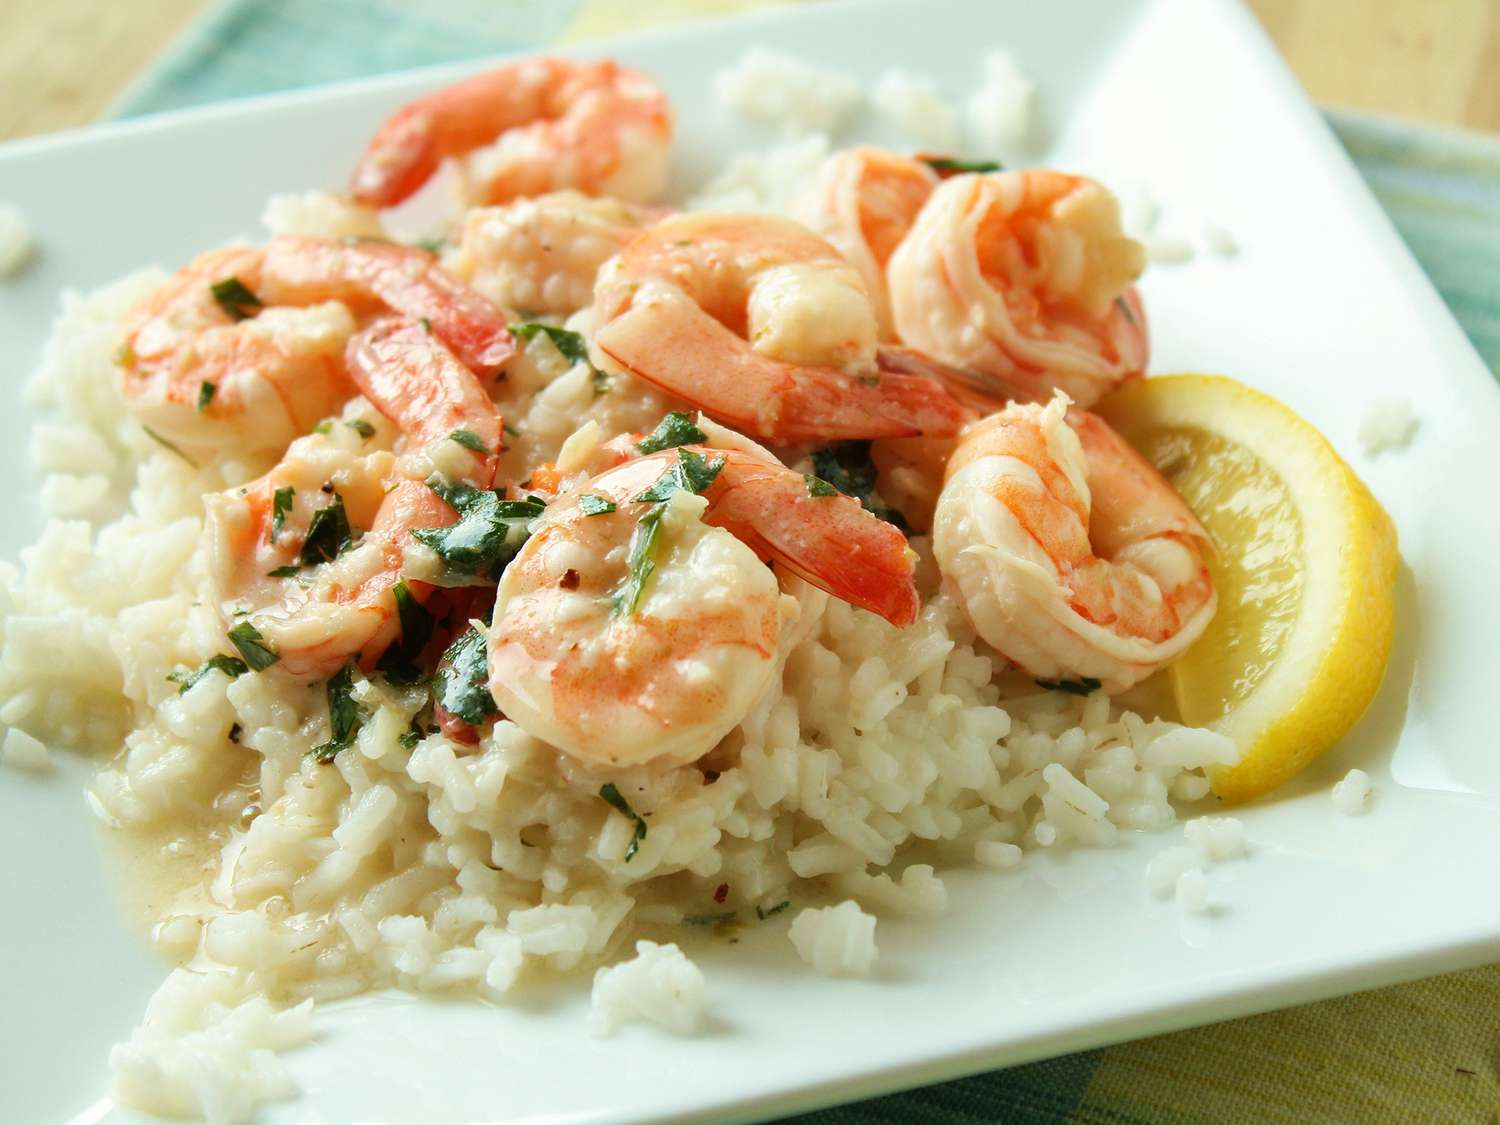 Close up view of Lemony Shrimp over Brown Rice garnished with fresh herbs and a lemon wedge on a white plate